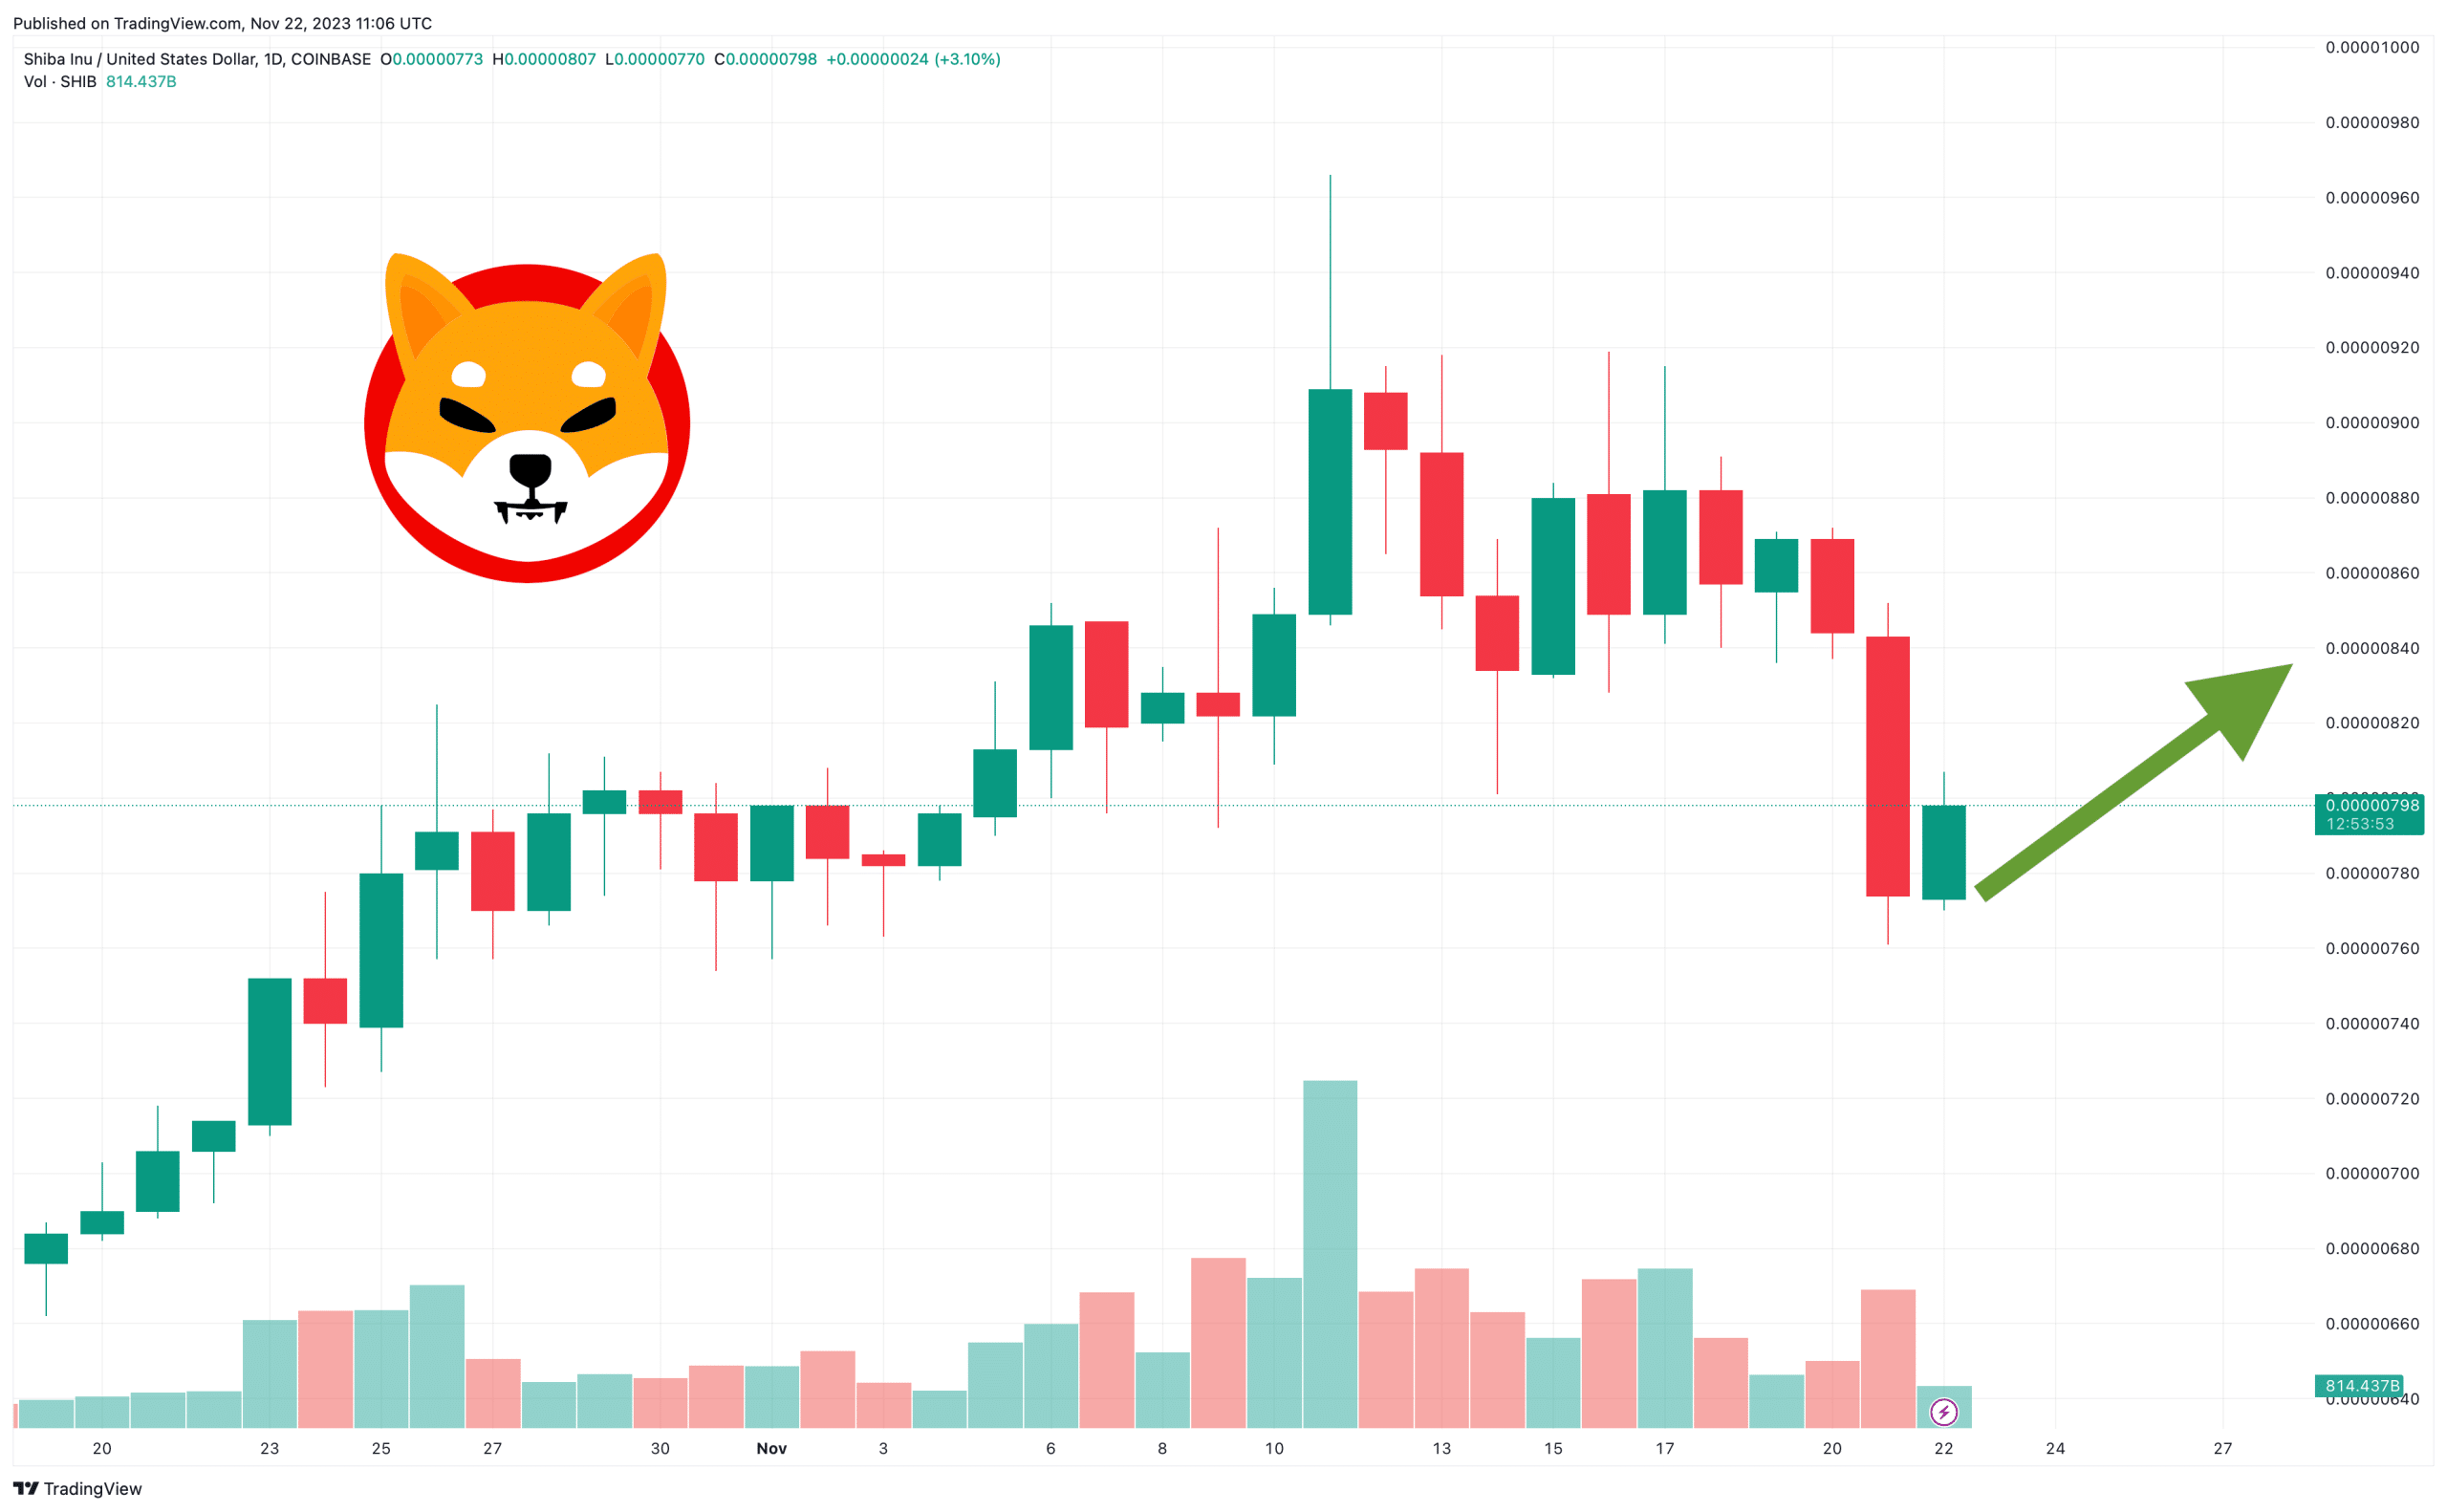 Shiba Inu Price Prediction as Technical Analysis Shows Downward Trend Since August 2022 – Is a Breakout Possible?